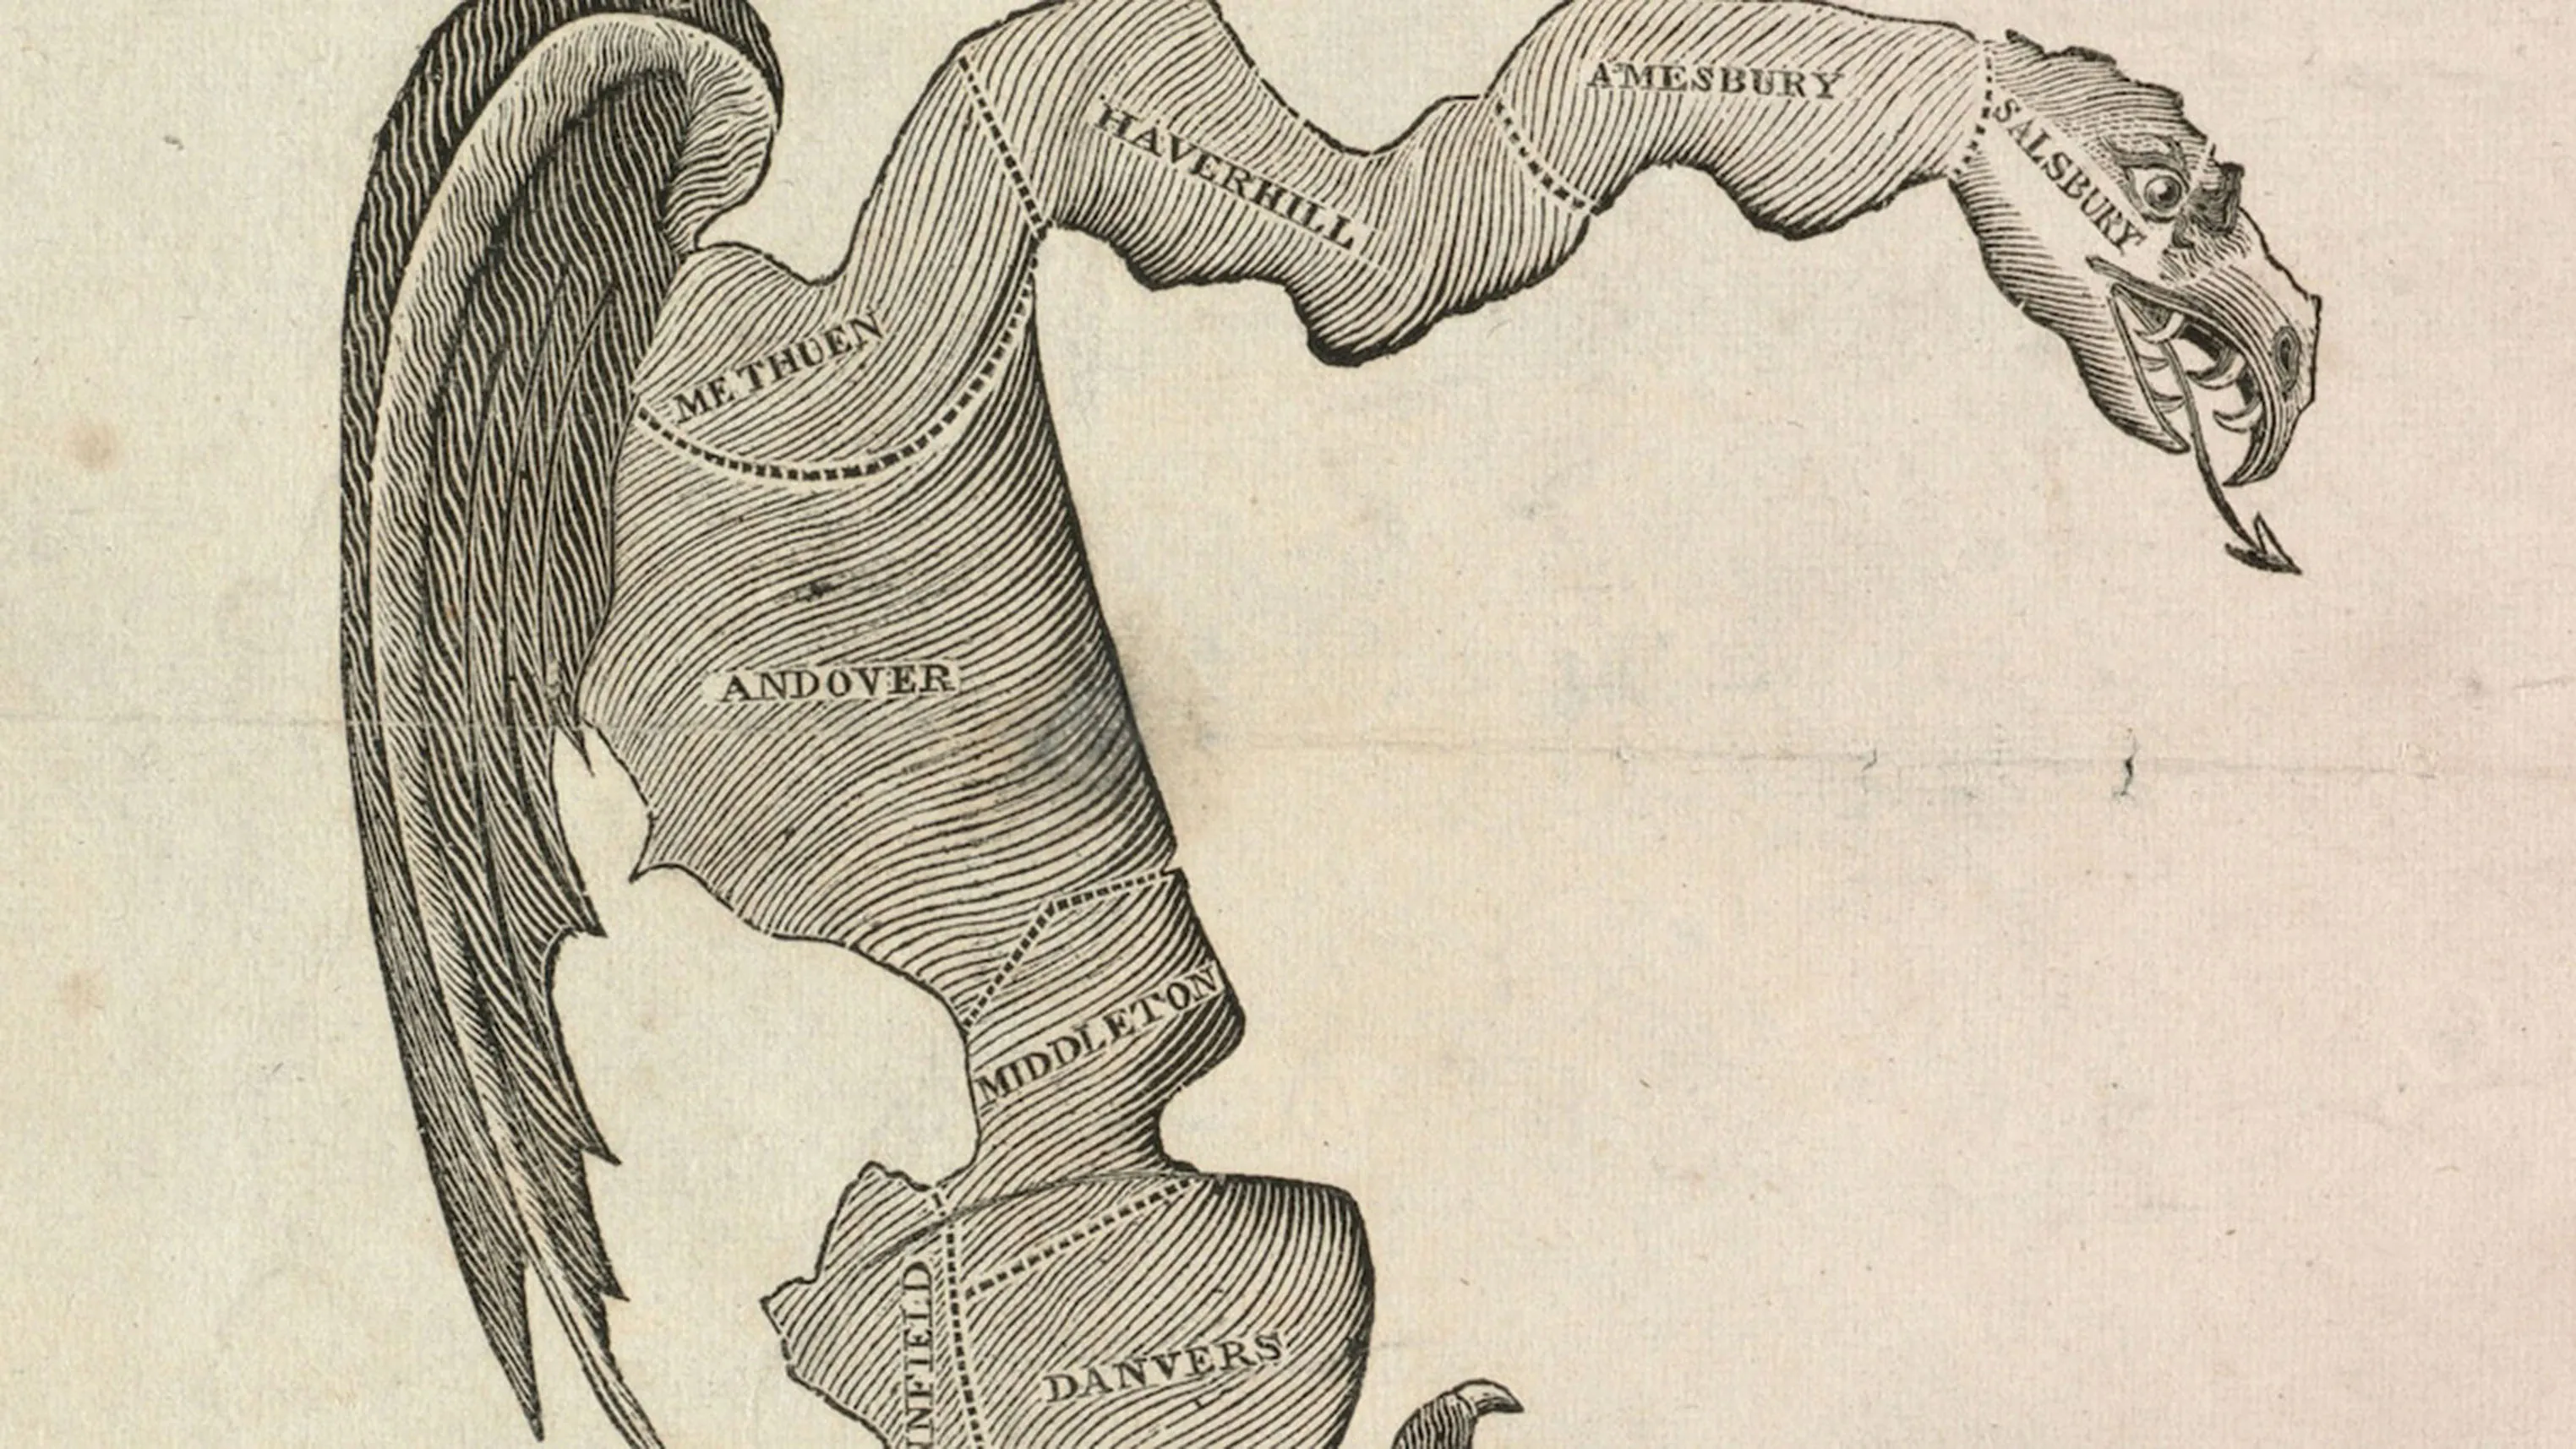 An illustration shows a cartoon map of Gerry-Mander in the Boston Gazette Newspaper.